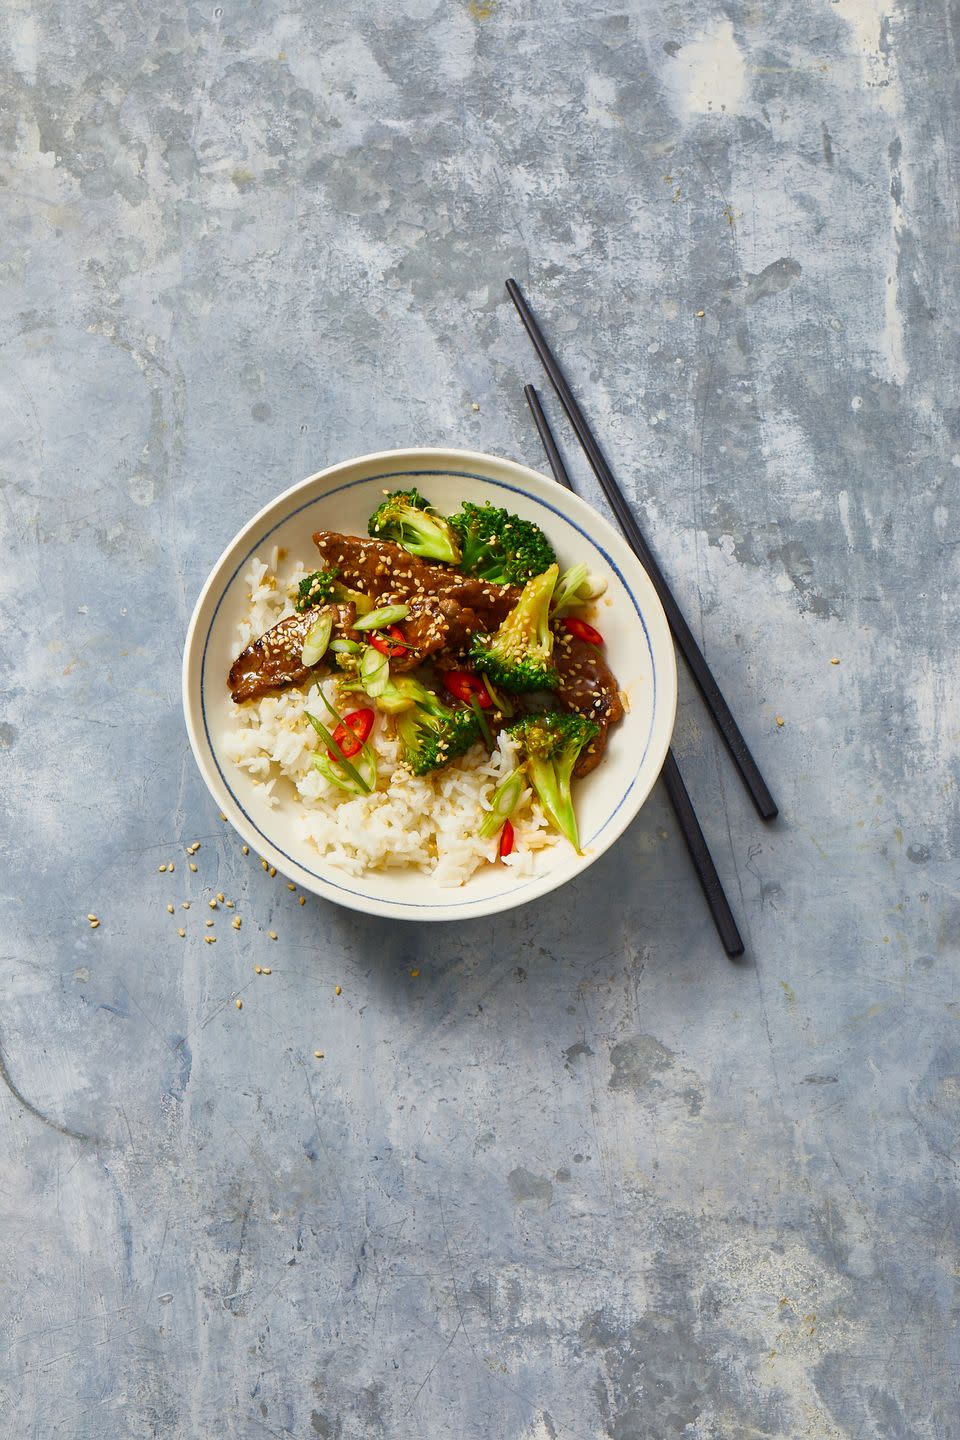 beef and broccoli with white rice in a bowl